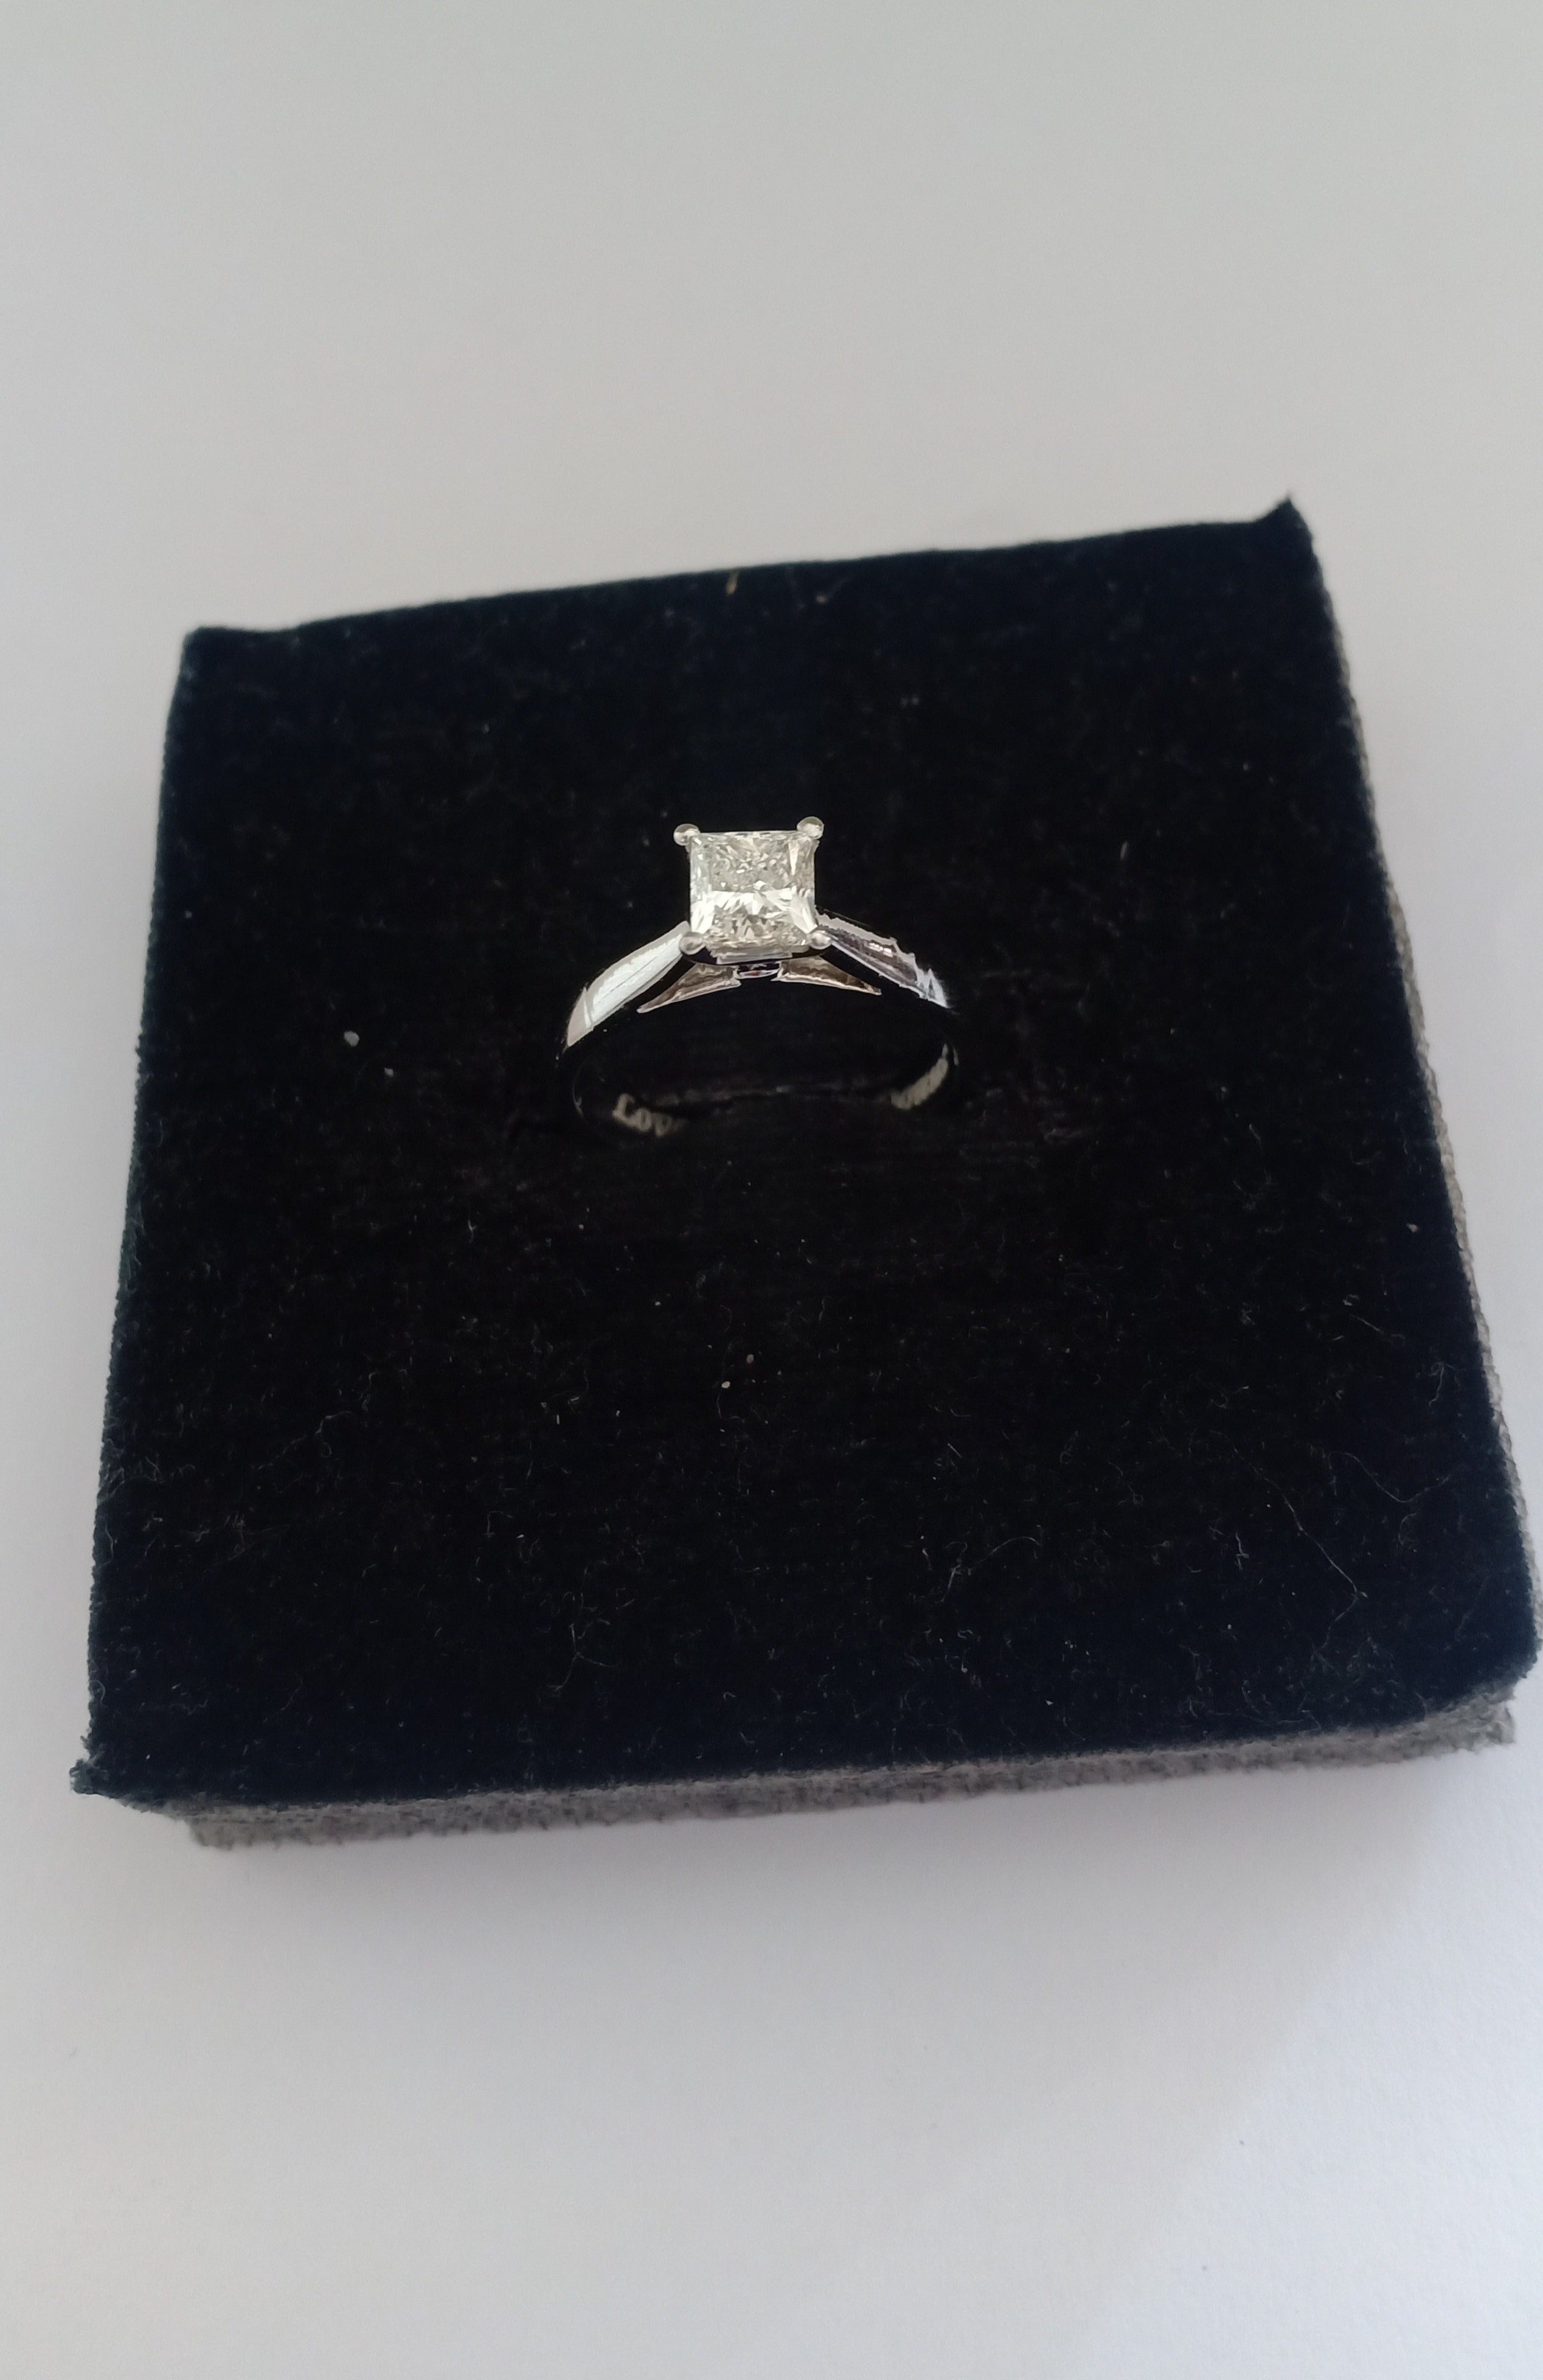 Princess CZ Solitaire Ring